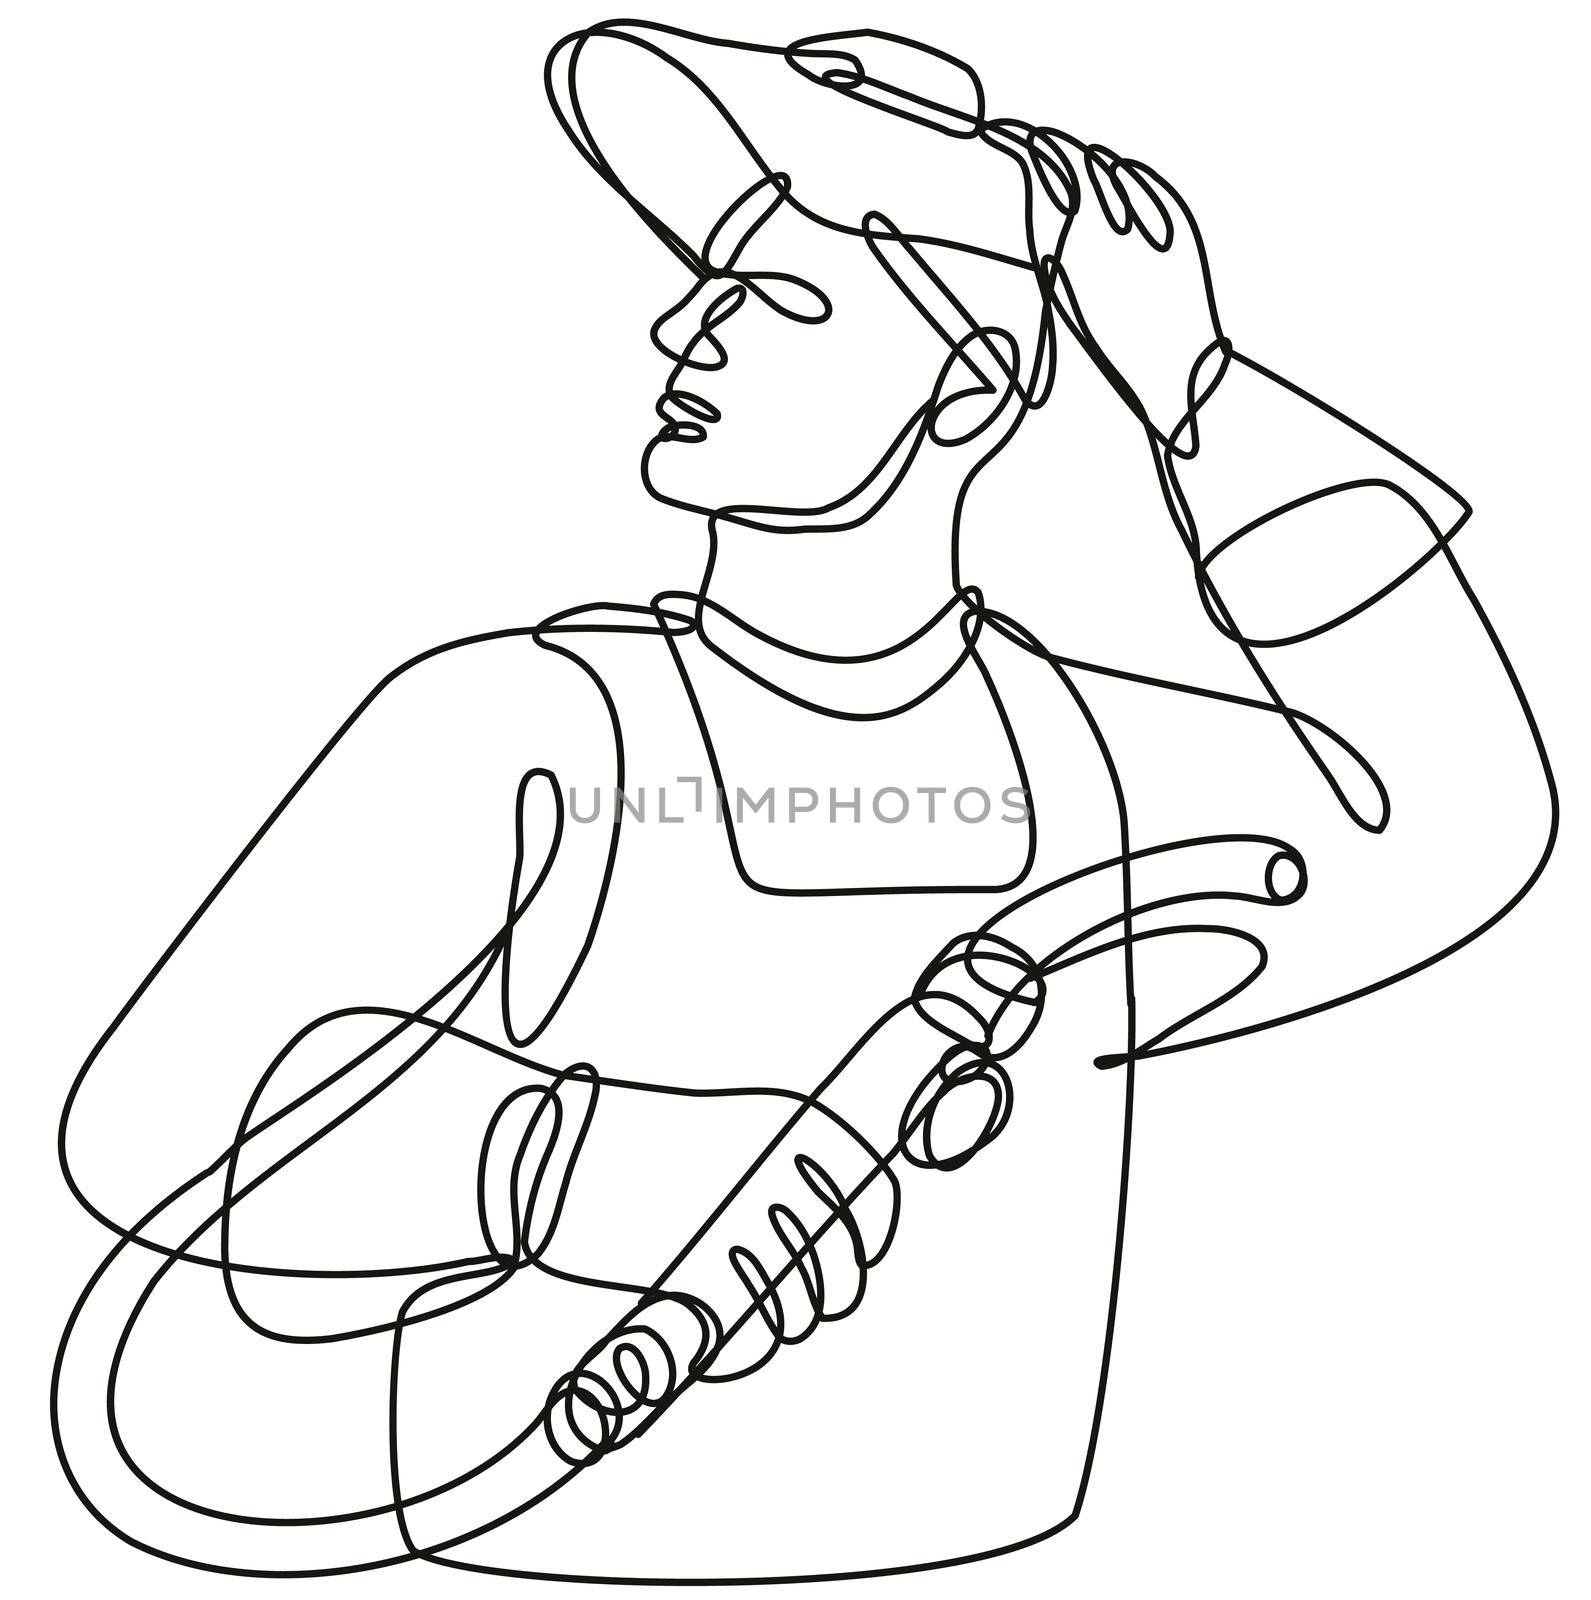 Continuous line drawing illustration of a welder with visor holding welding torch done in mono line or doodle style in black and white on isolated background. 